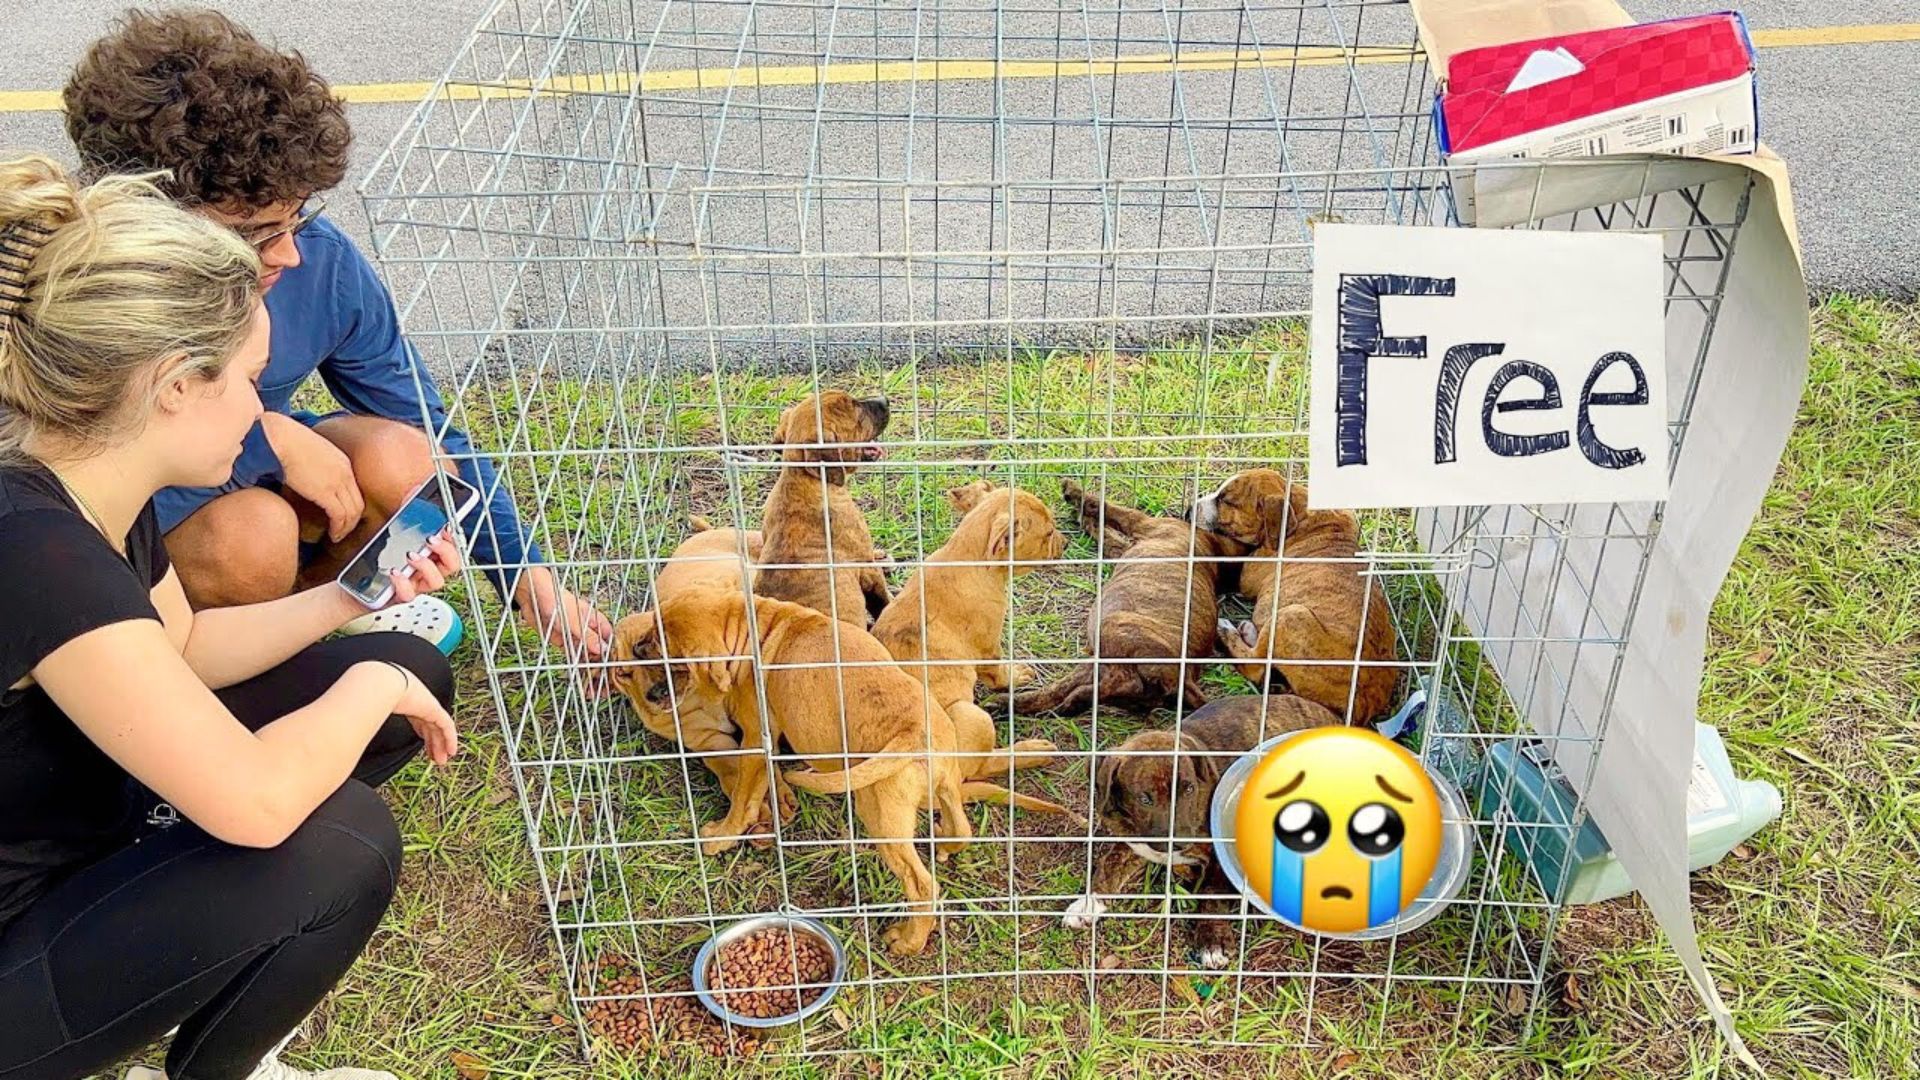 A Kind Man Rescues Seven Puppies Who Were Abandoned With A ‘Free’ Sign On The Kennel